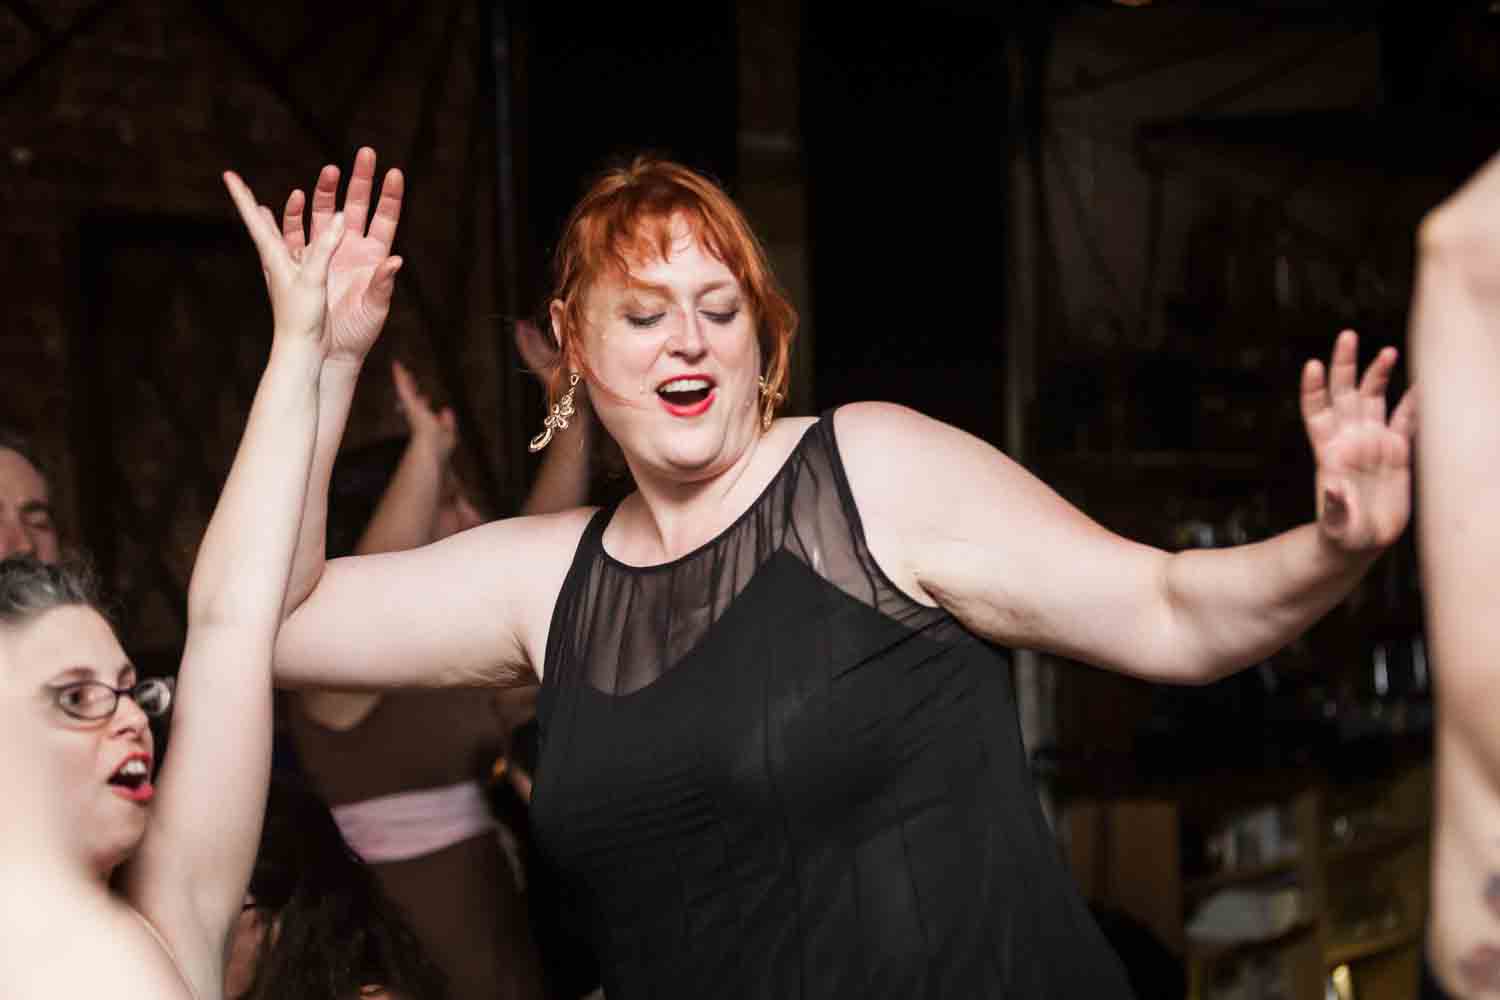 Red-haired guest in black dress dancing with hands up